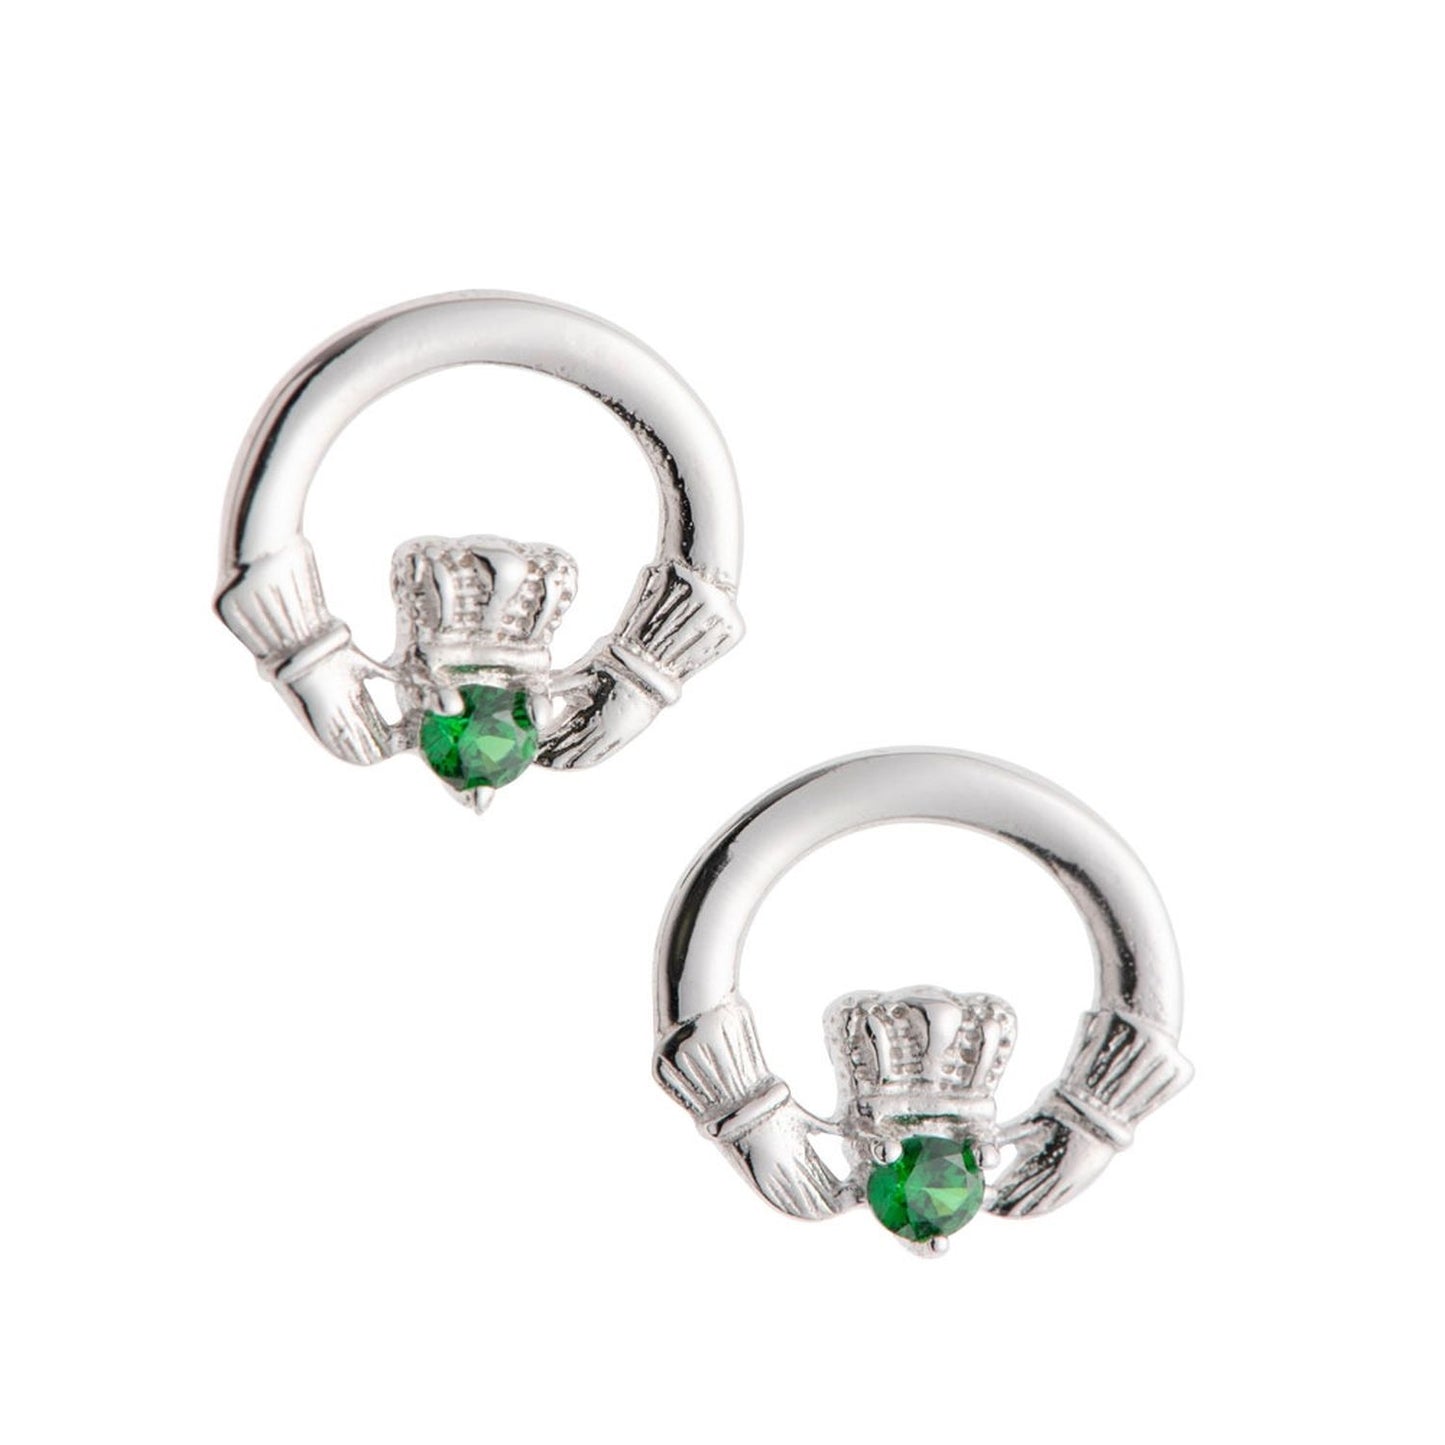 Galway Green Crystal Claddagh Earrings 0.98 Gms - Rhodium Plated Sterling Silver